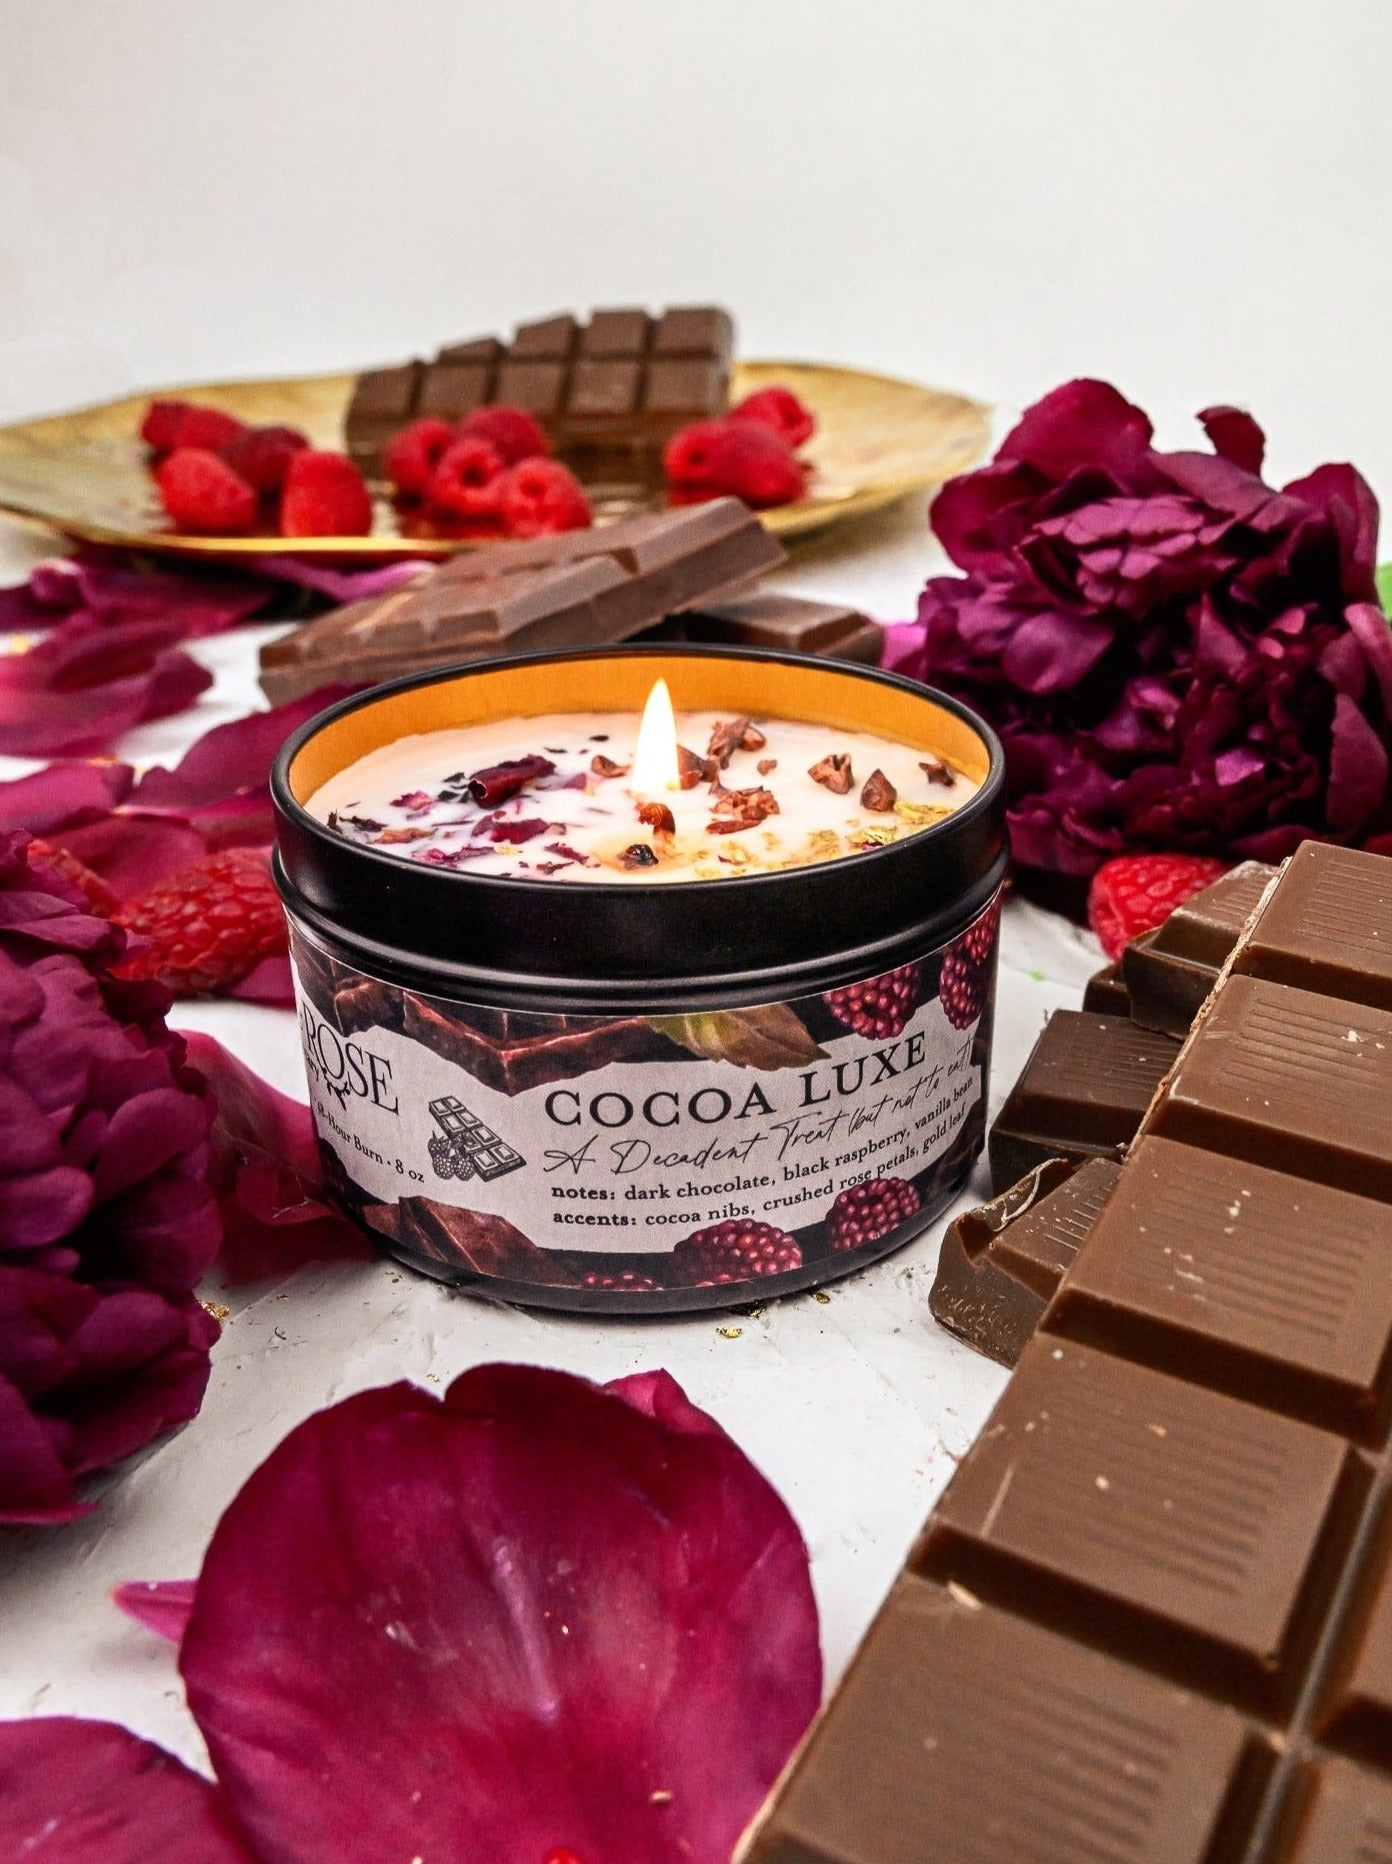 COCOA LUXE Chocolate Raspberry Candle